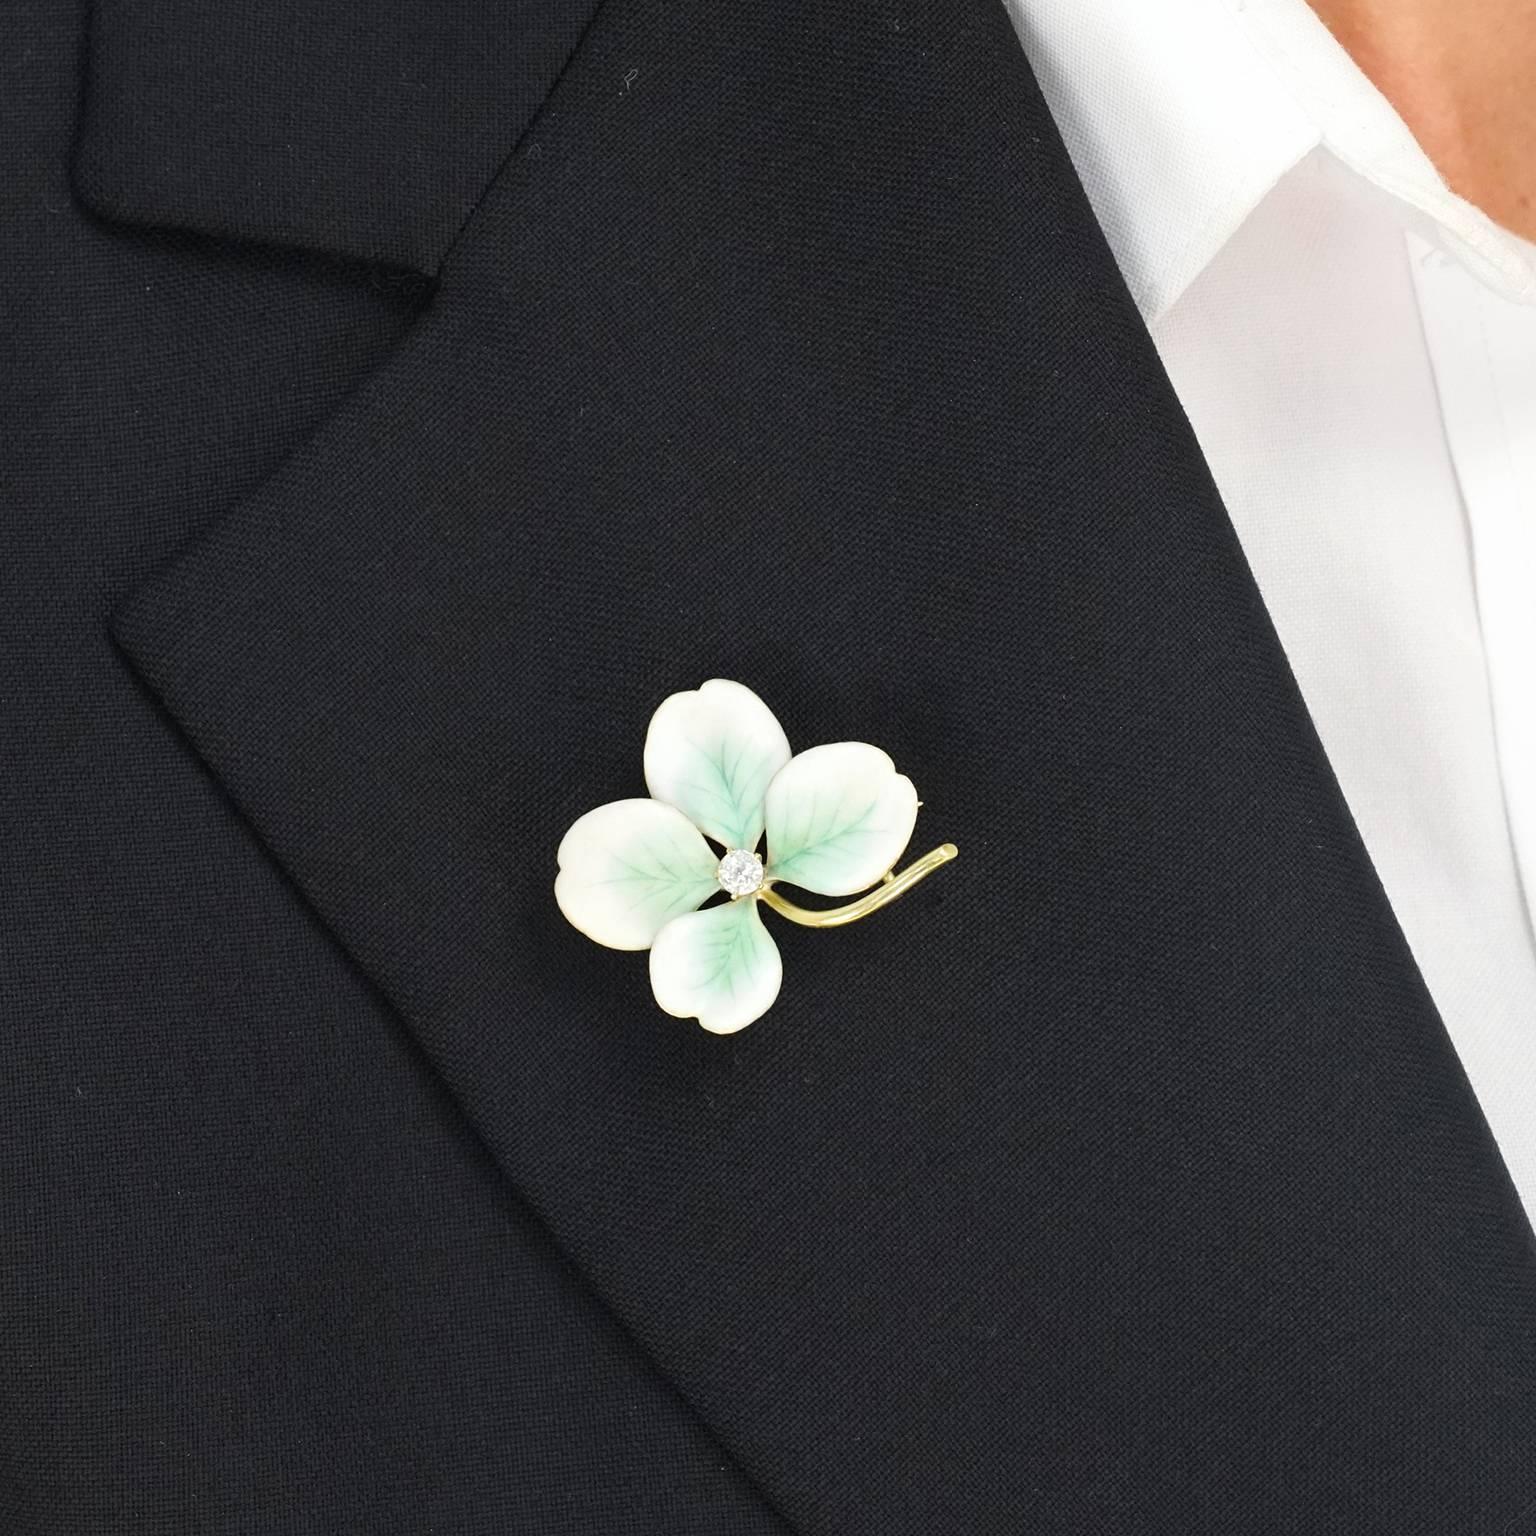 Circa 1910, 14k, American.  As classic as it is charming, this clover brooch is enameled in delicate pale green and ivory. Its fresh, gentle tones are perfectly offset by warm fourteen-karat gold and accented with a sparkly diamond. Beautifully made